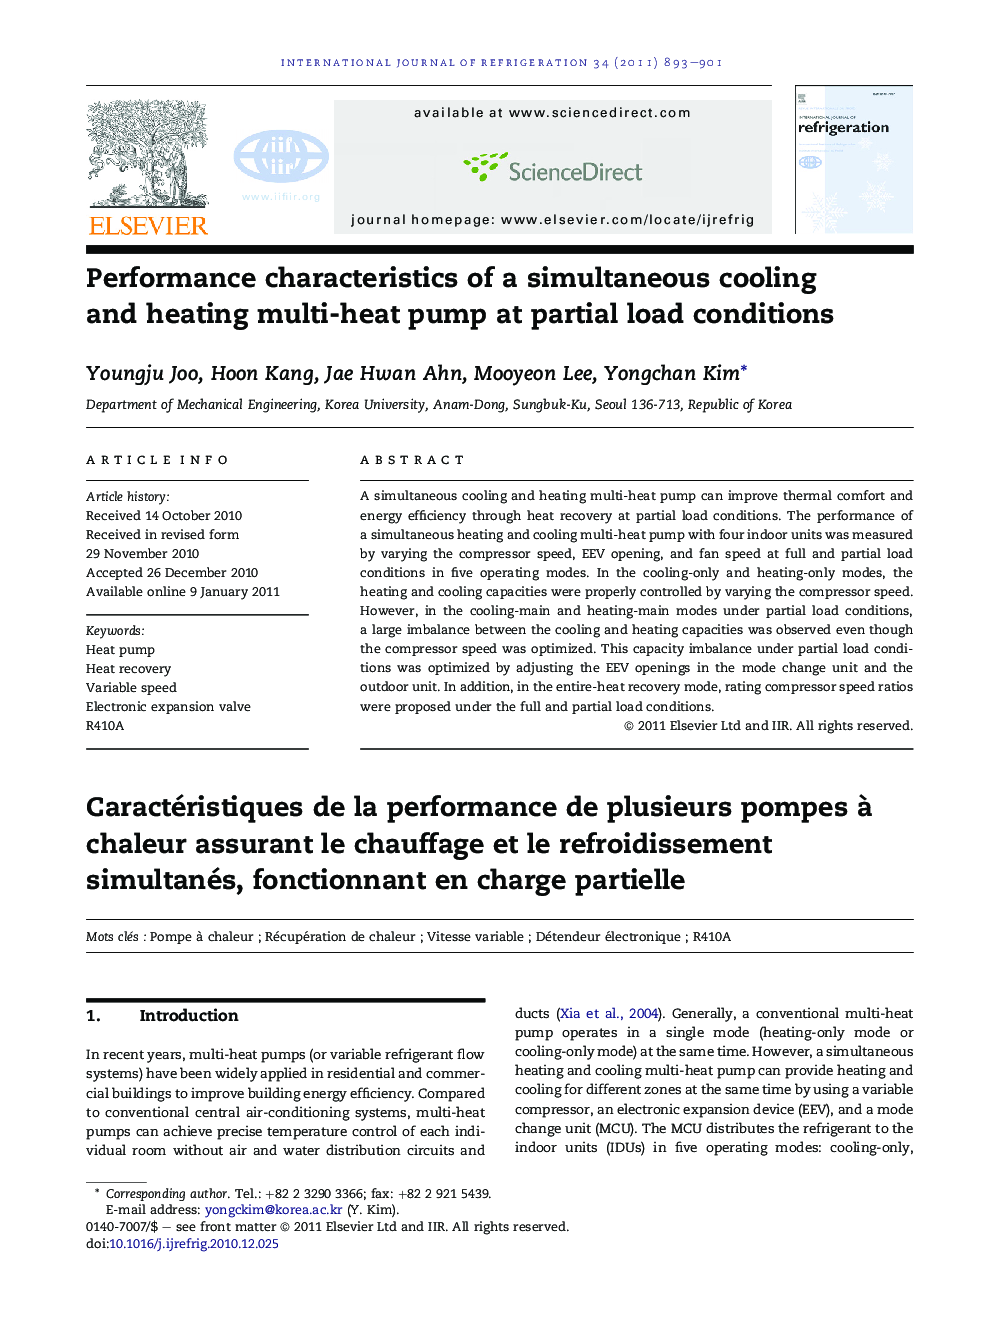 Performance characteristics of a simultaneous cooling and heating multi-heat pump at partial load conditions